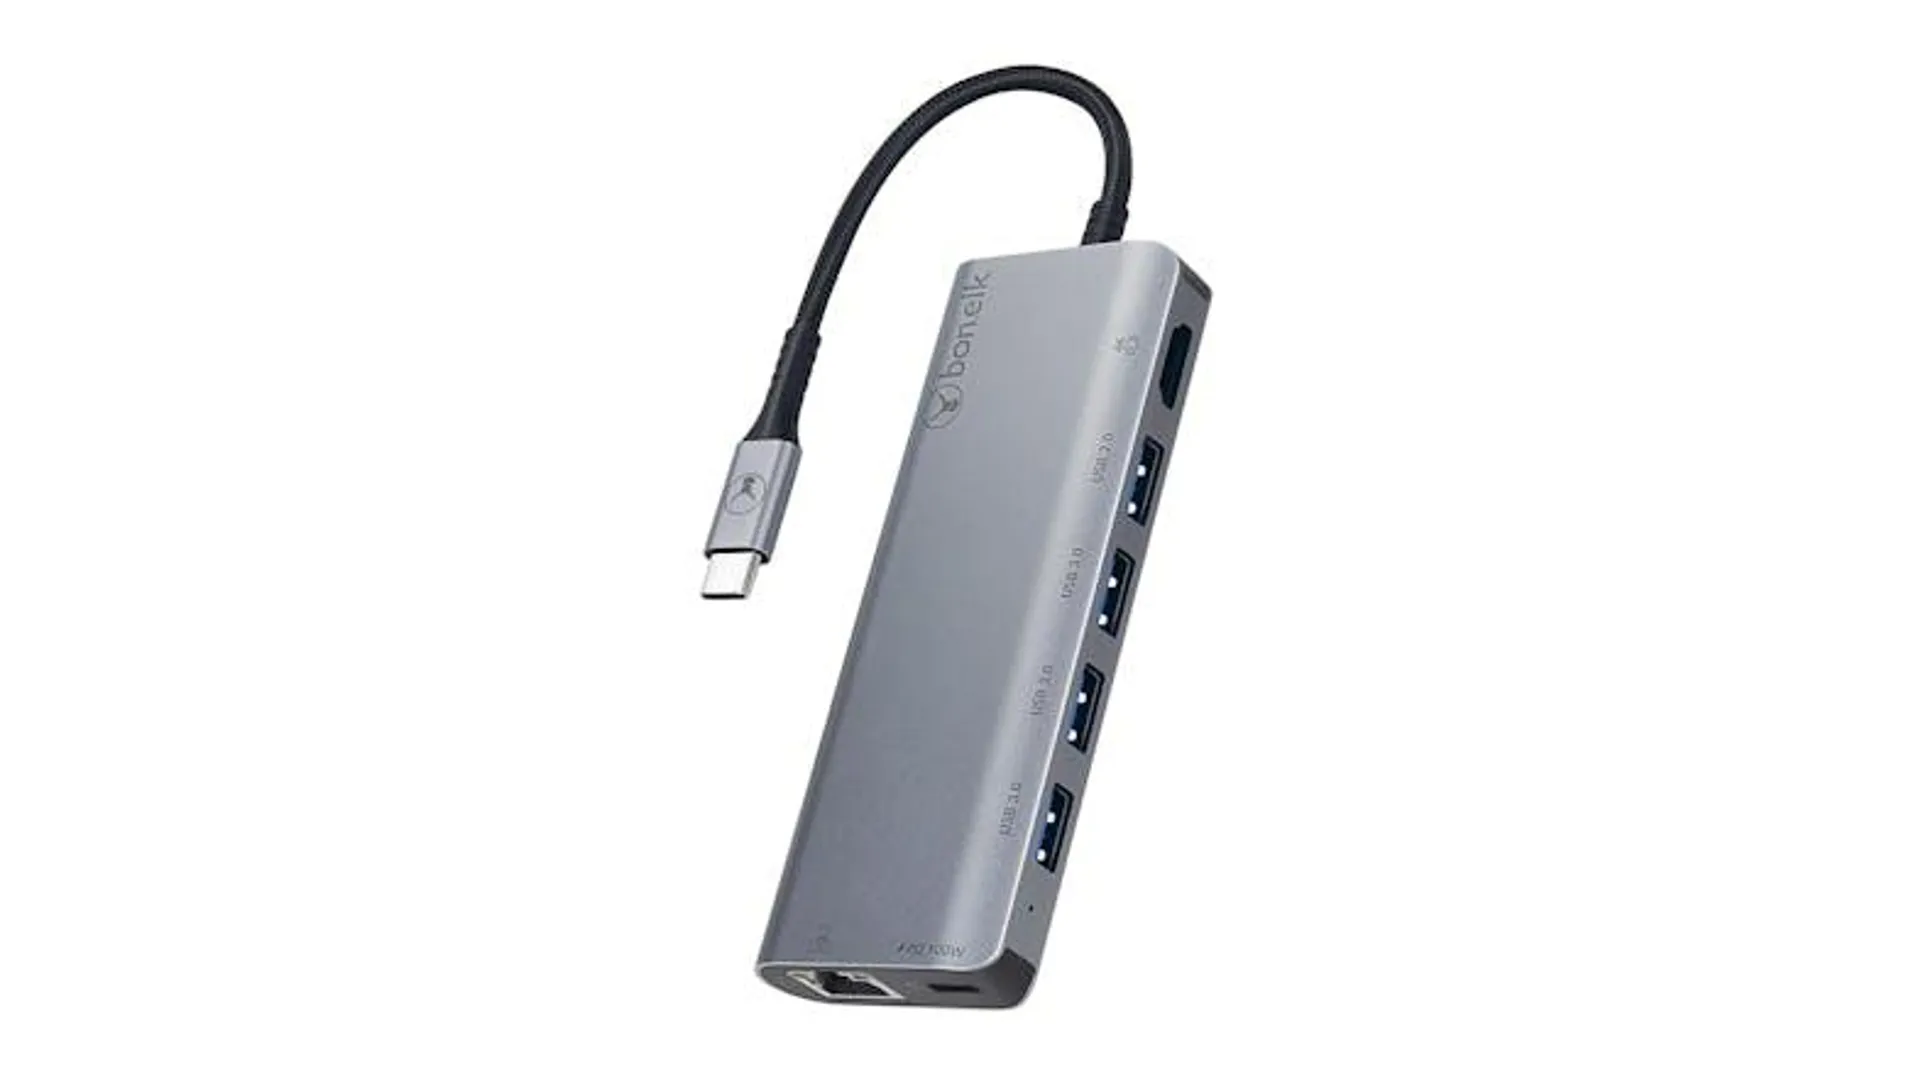 Bon.Elk Long-Life USB-C to 7-in-1 Multiport Hub - Space Grey (ELK-80028-R) Supports up to 100W Power Delivery